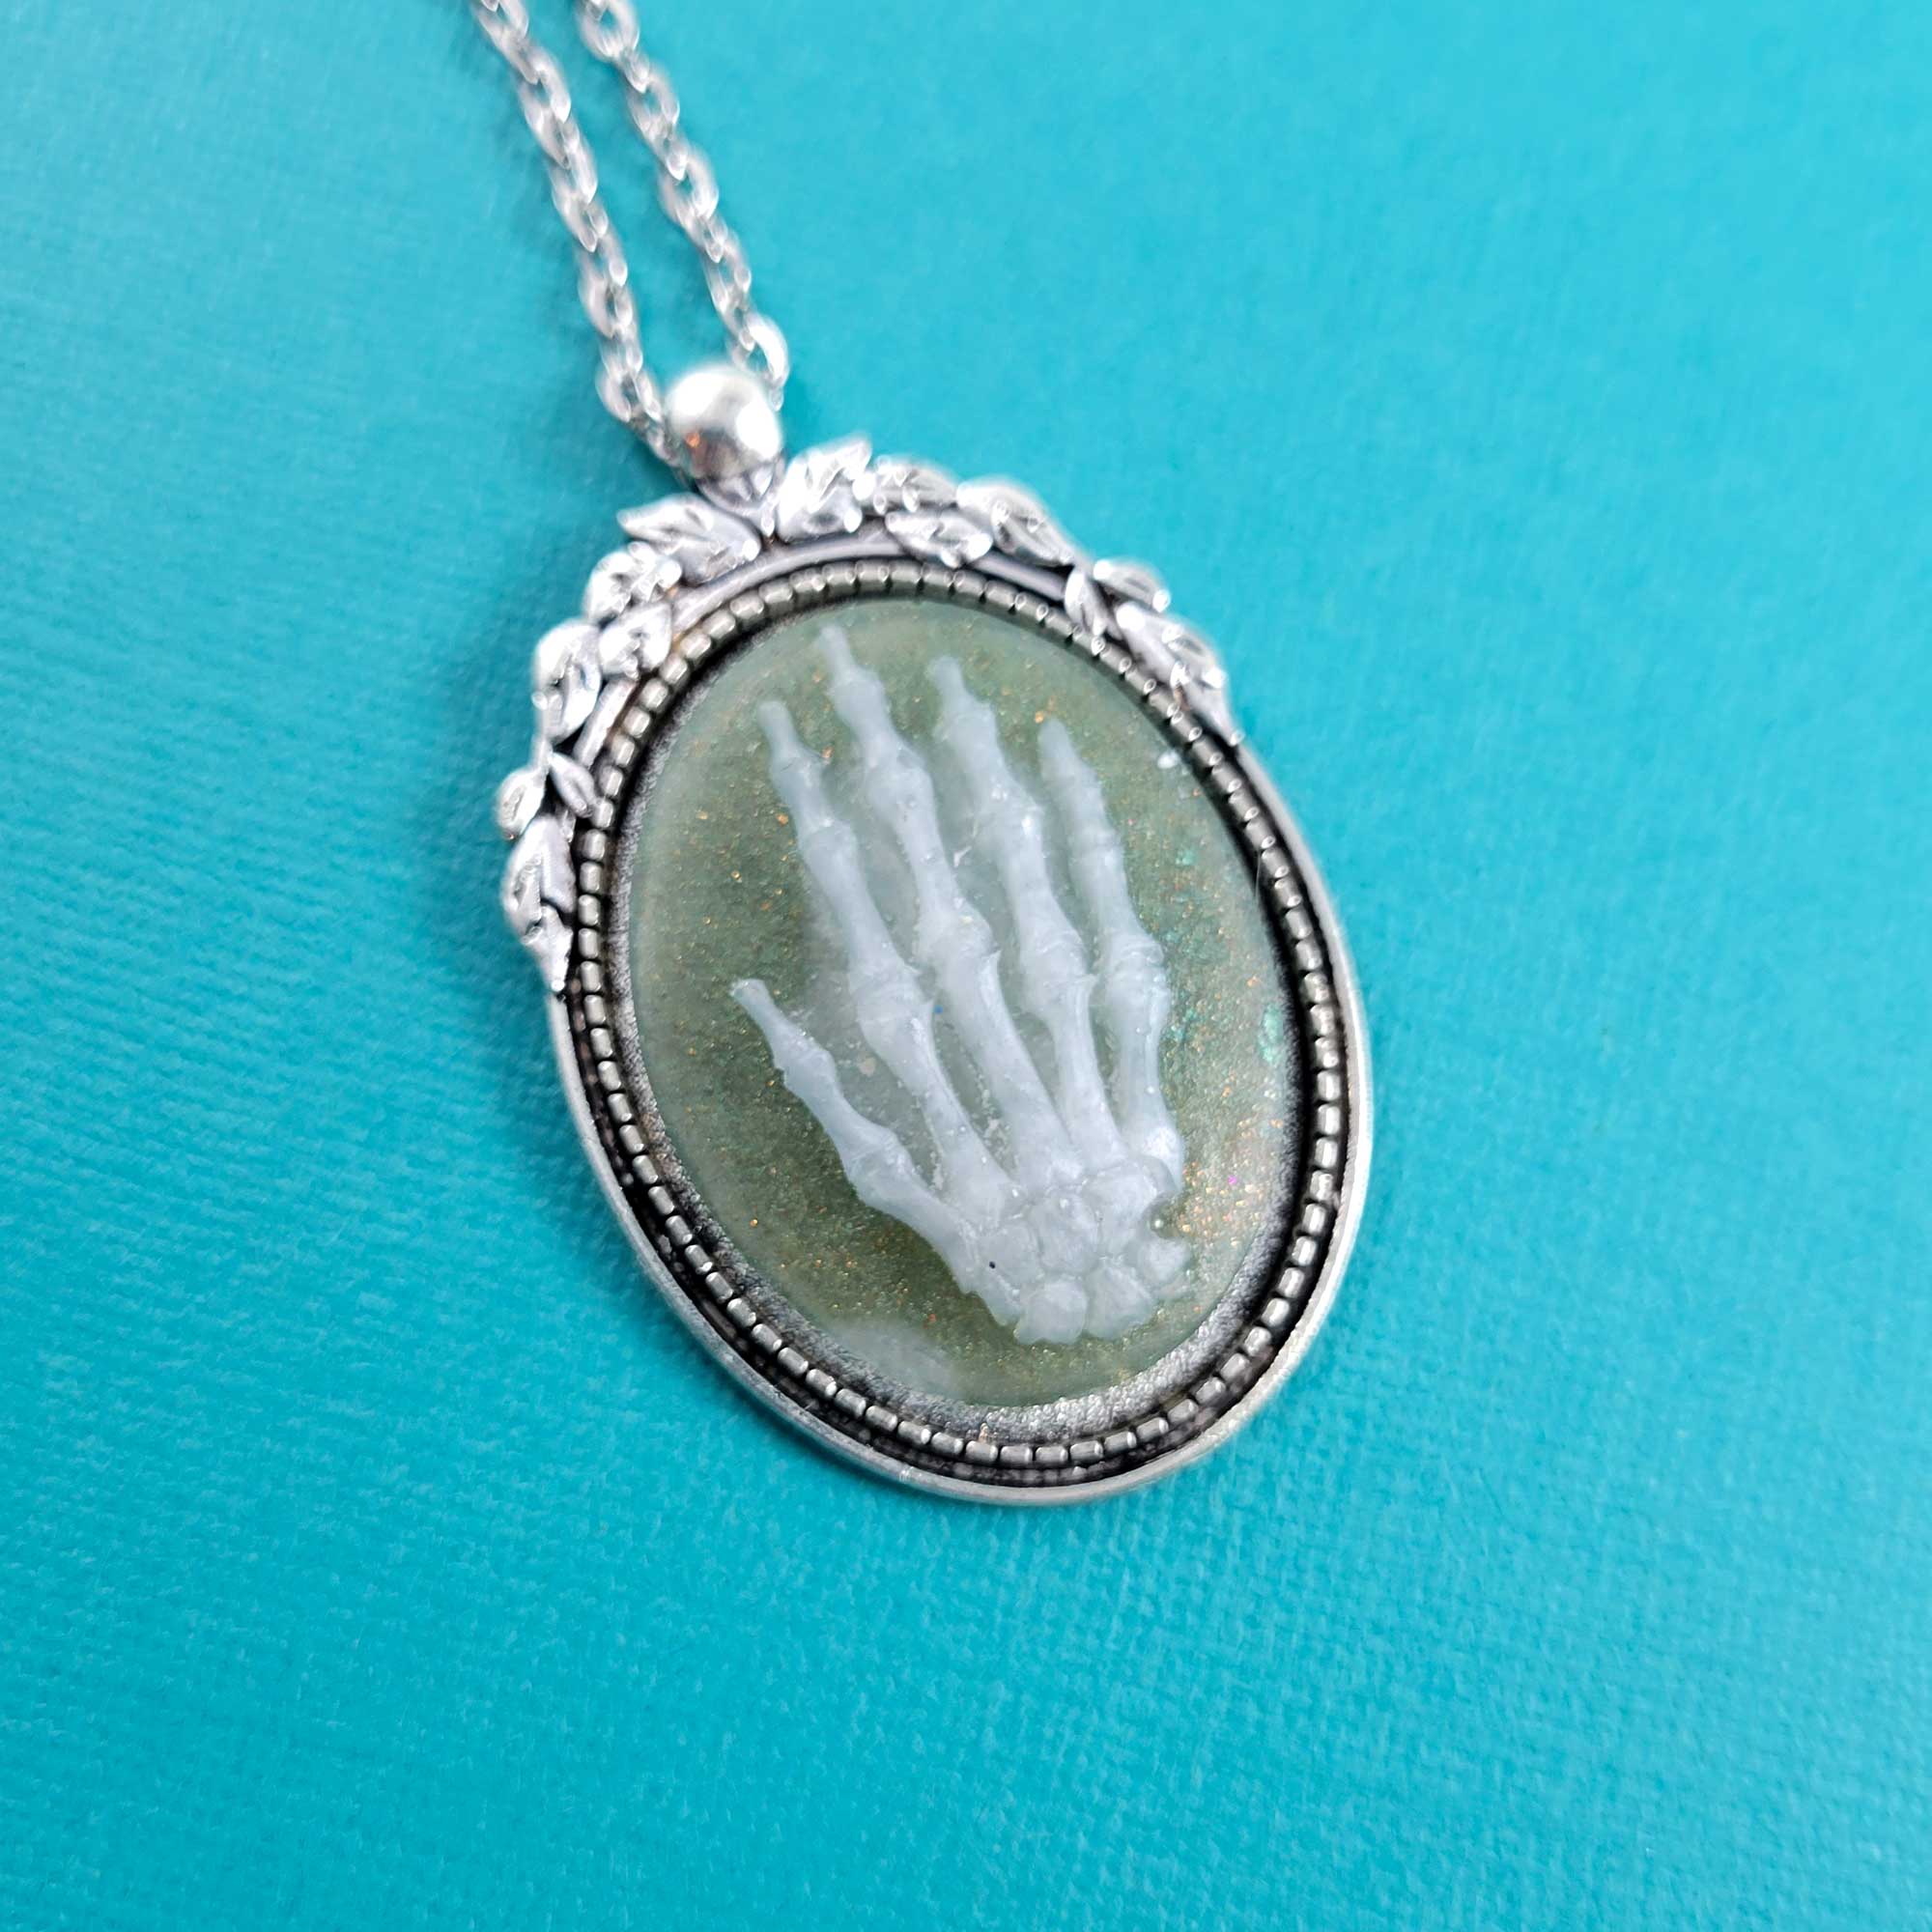 White & Green Hand of Death Necklace by Wilde Designs